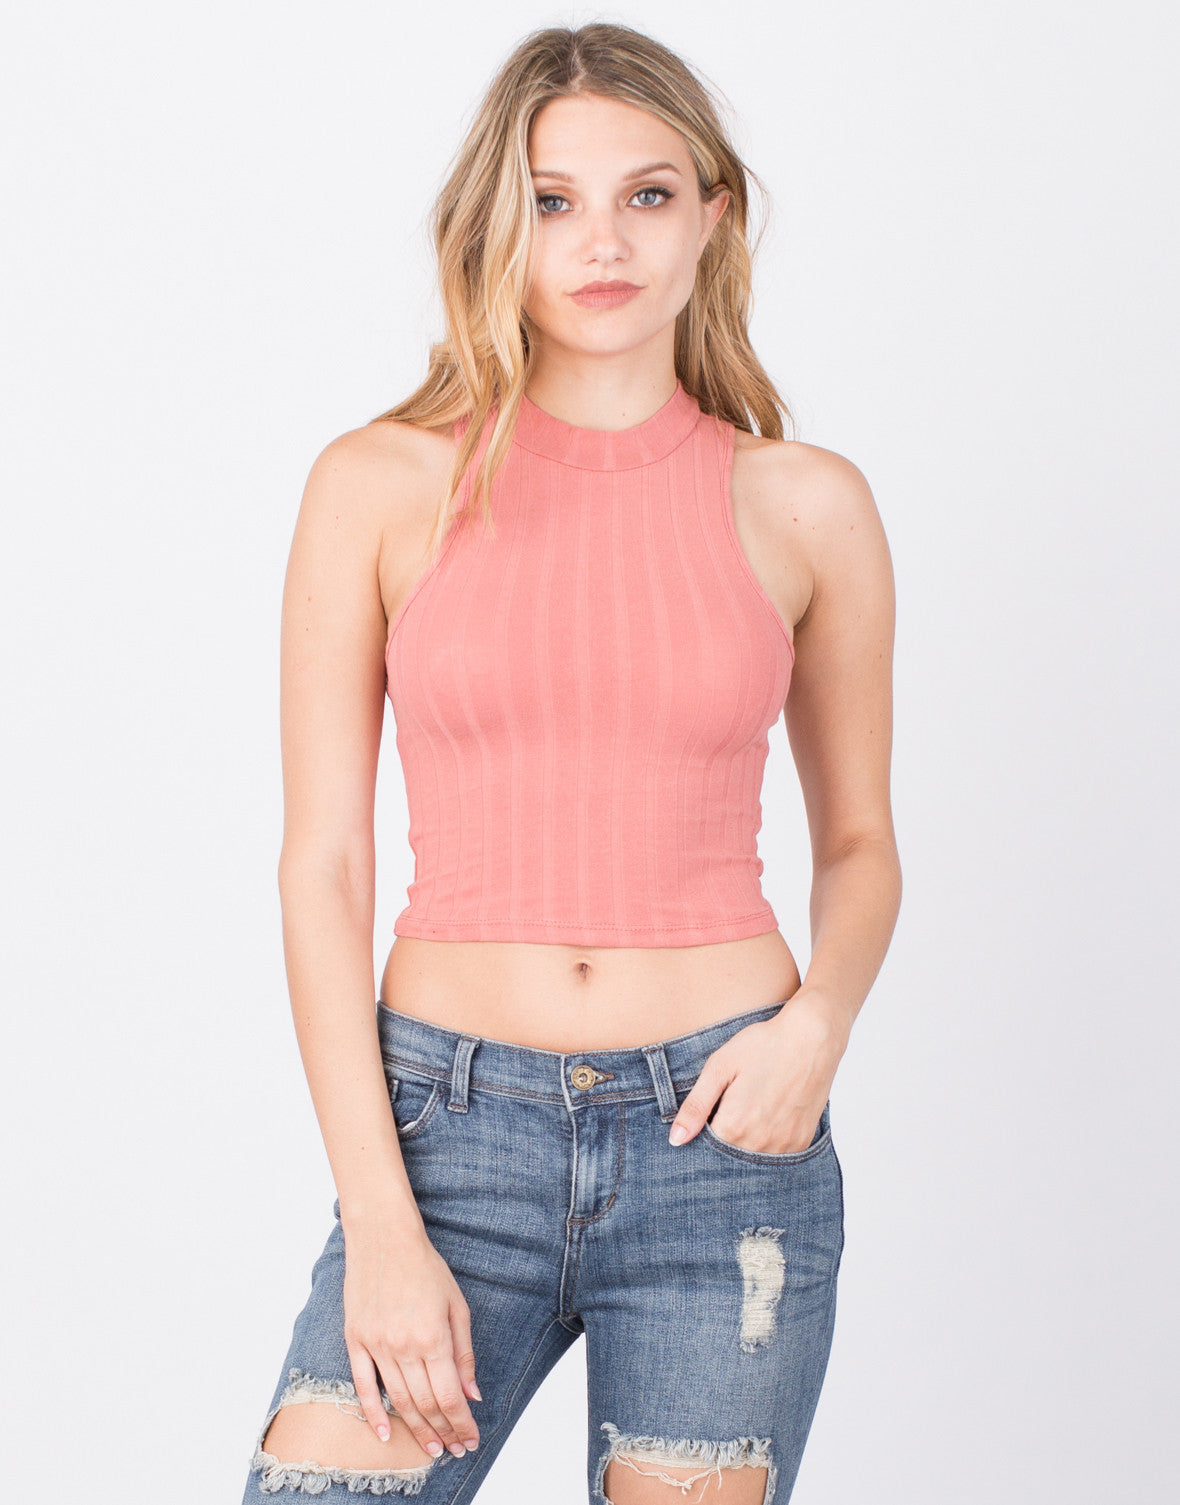 Download To the Neck Cropped Tank - Mock Neck Crop Top - Ribbed ...